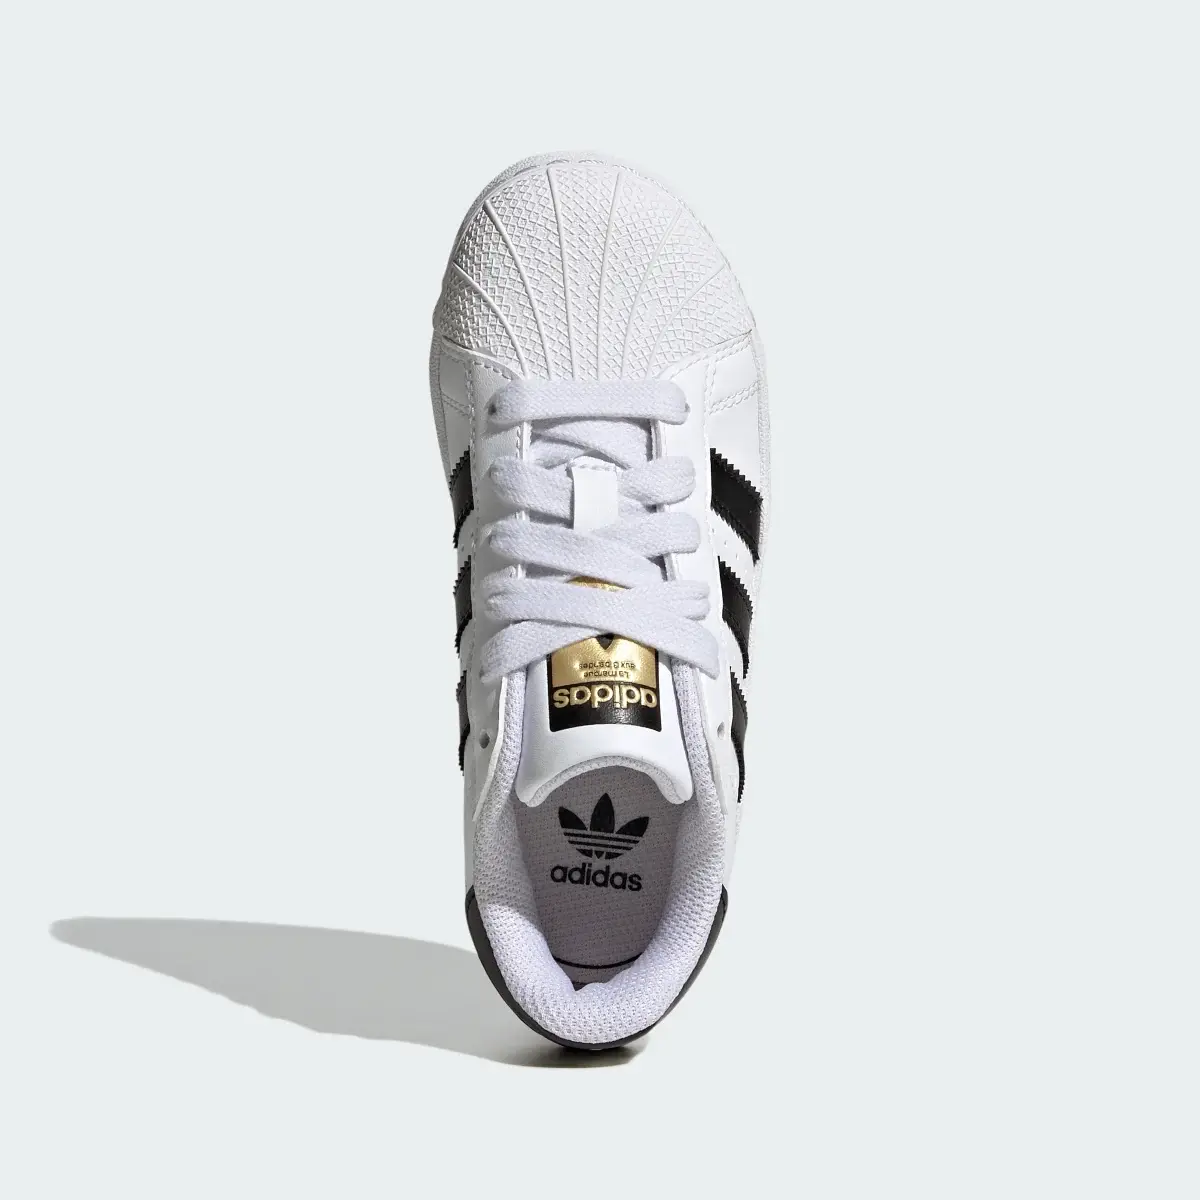 Adidas Superstar XLG Shoes Kids. 3